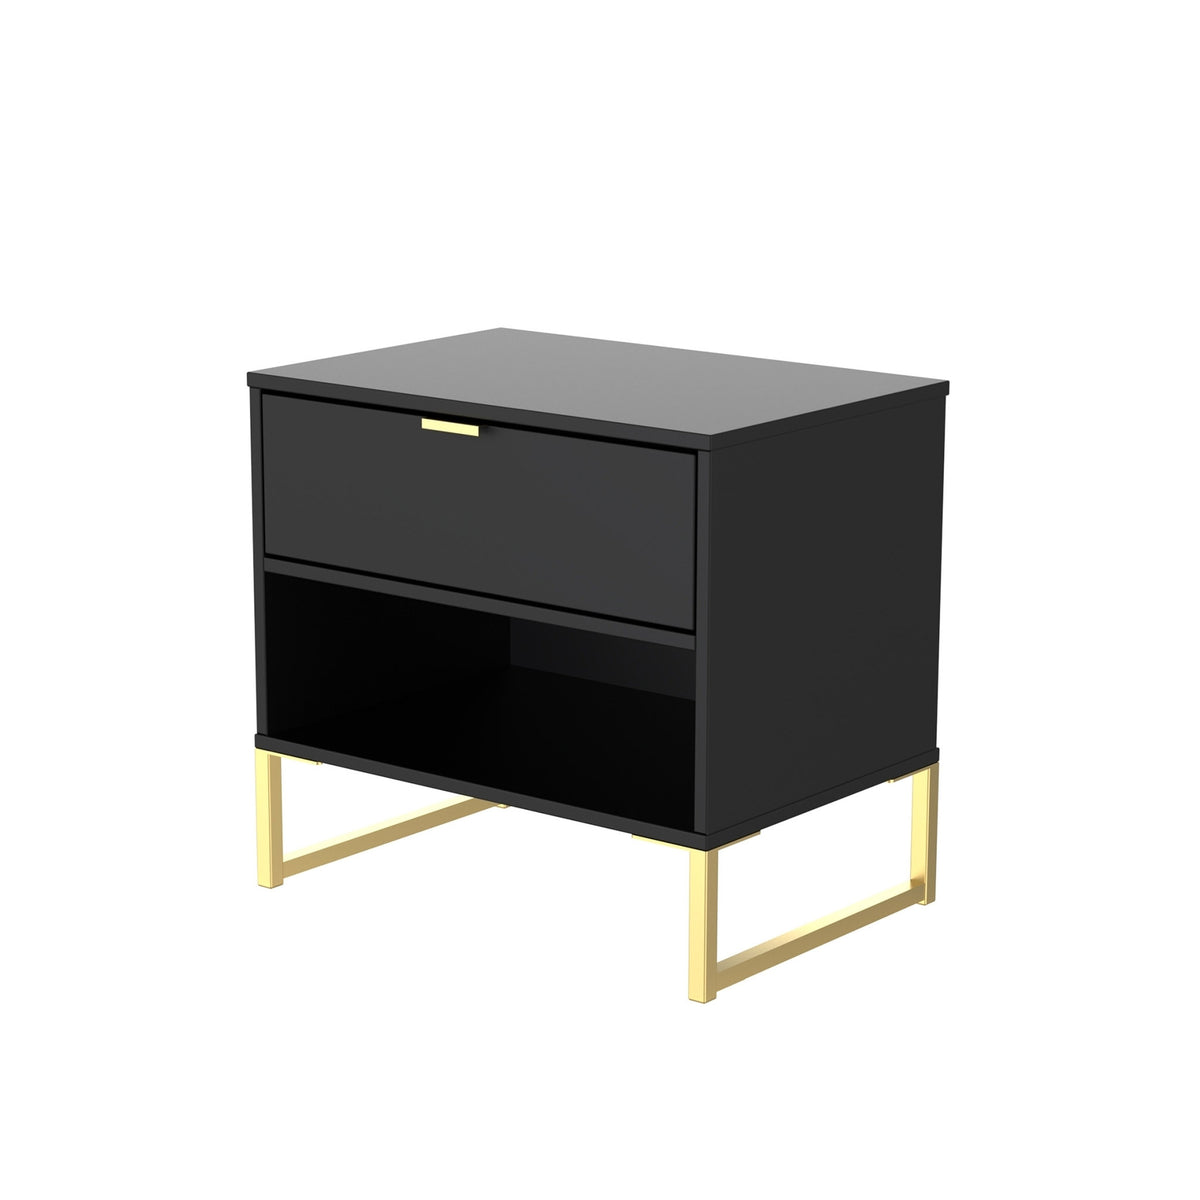 Hudson Hudson 1 Drawer with open shelf side table with gold legs